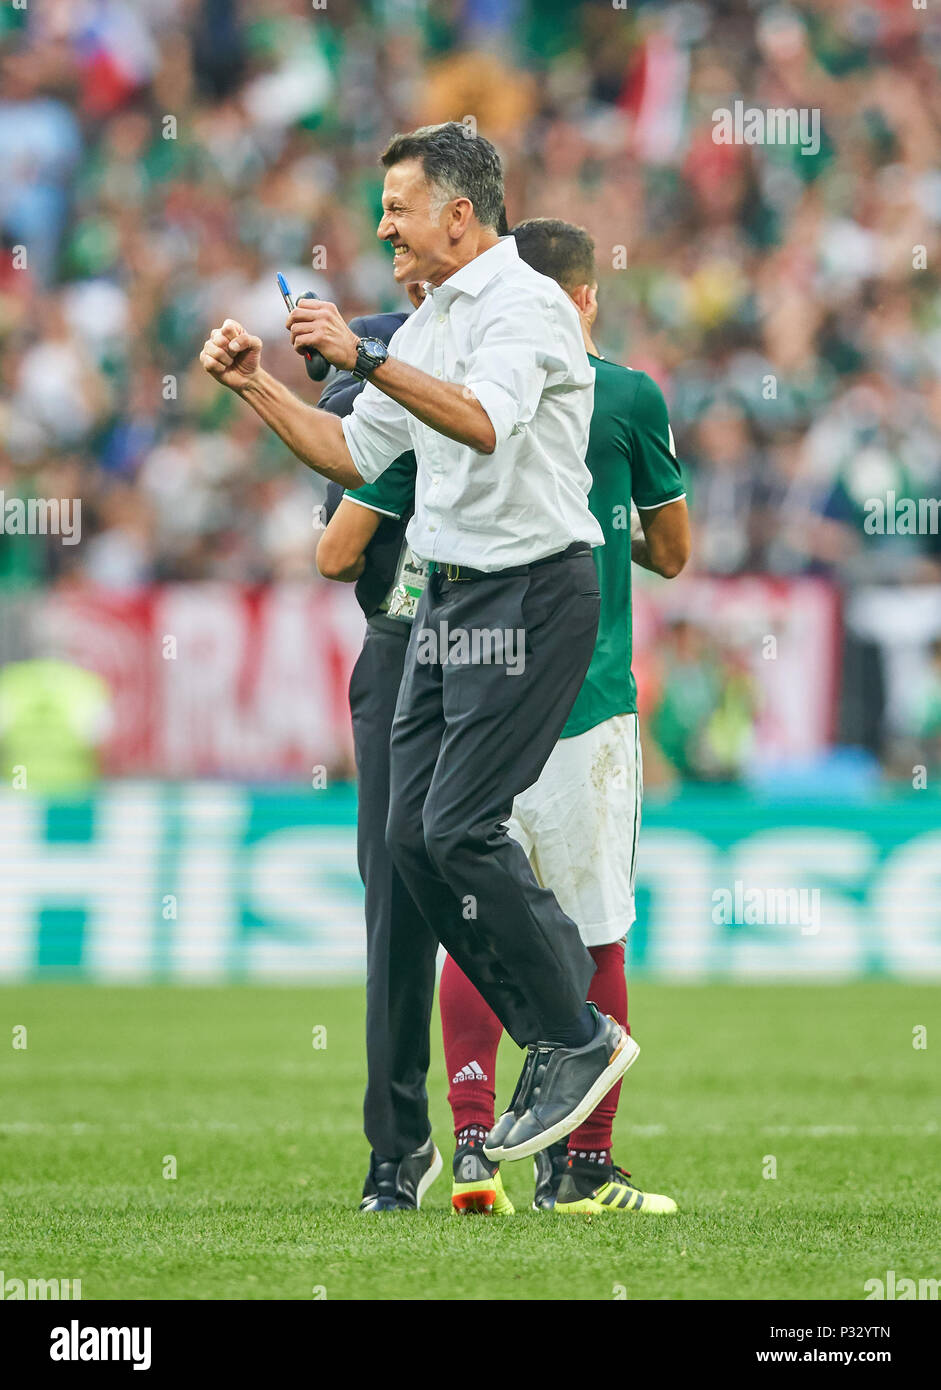 Moscow, Russia, 17 June 2018. Germany - Mexico, Soccer, Moscow, June 17, 2018 Juan Carlos OSORIO, MEX coach,  Cheering, joy, emotions, celebrating, laughing, cheering, rejoice, tearing up the arms, clenching the fist,  GERMANY - MEXICO FIFA WORLD CUP 2018 RUSSIA, Group F, Season 2018/2019,  June 17, 2018 L u z h n i k i Stadium in Moscow, Russia.  © Peter Schatz / Alamy Live News Stock Photo